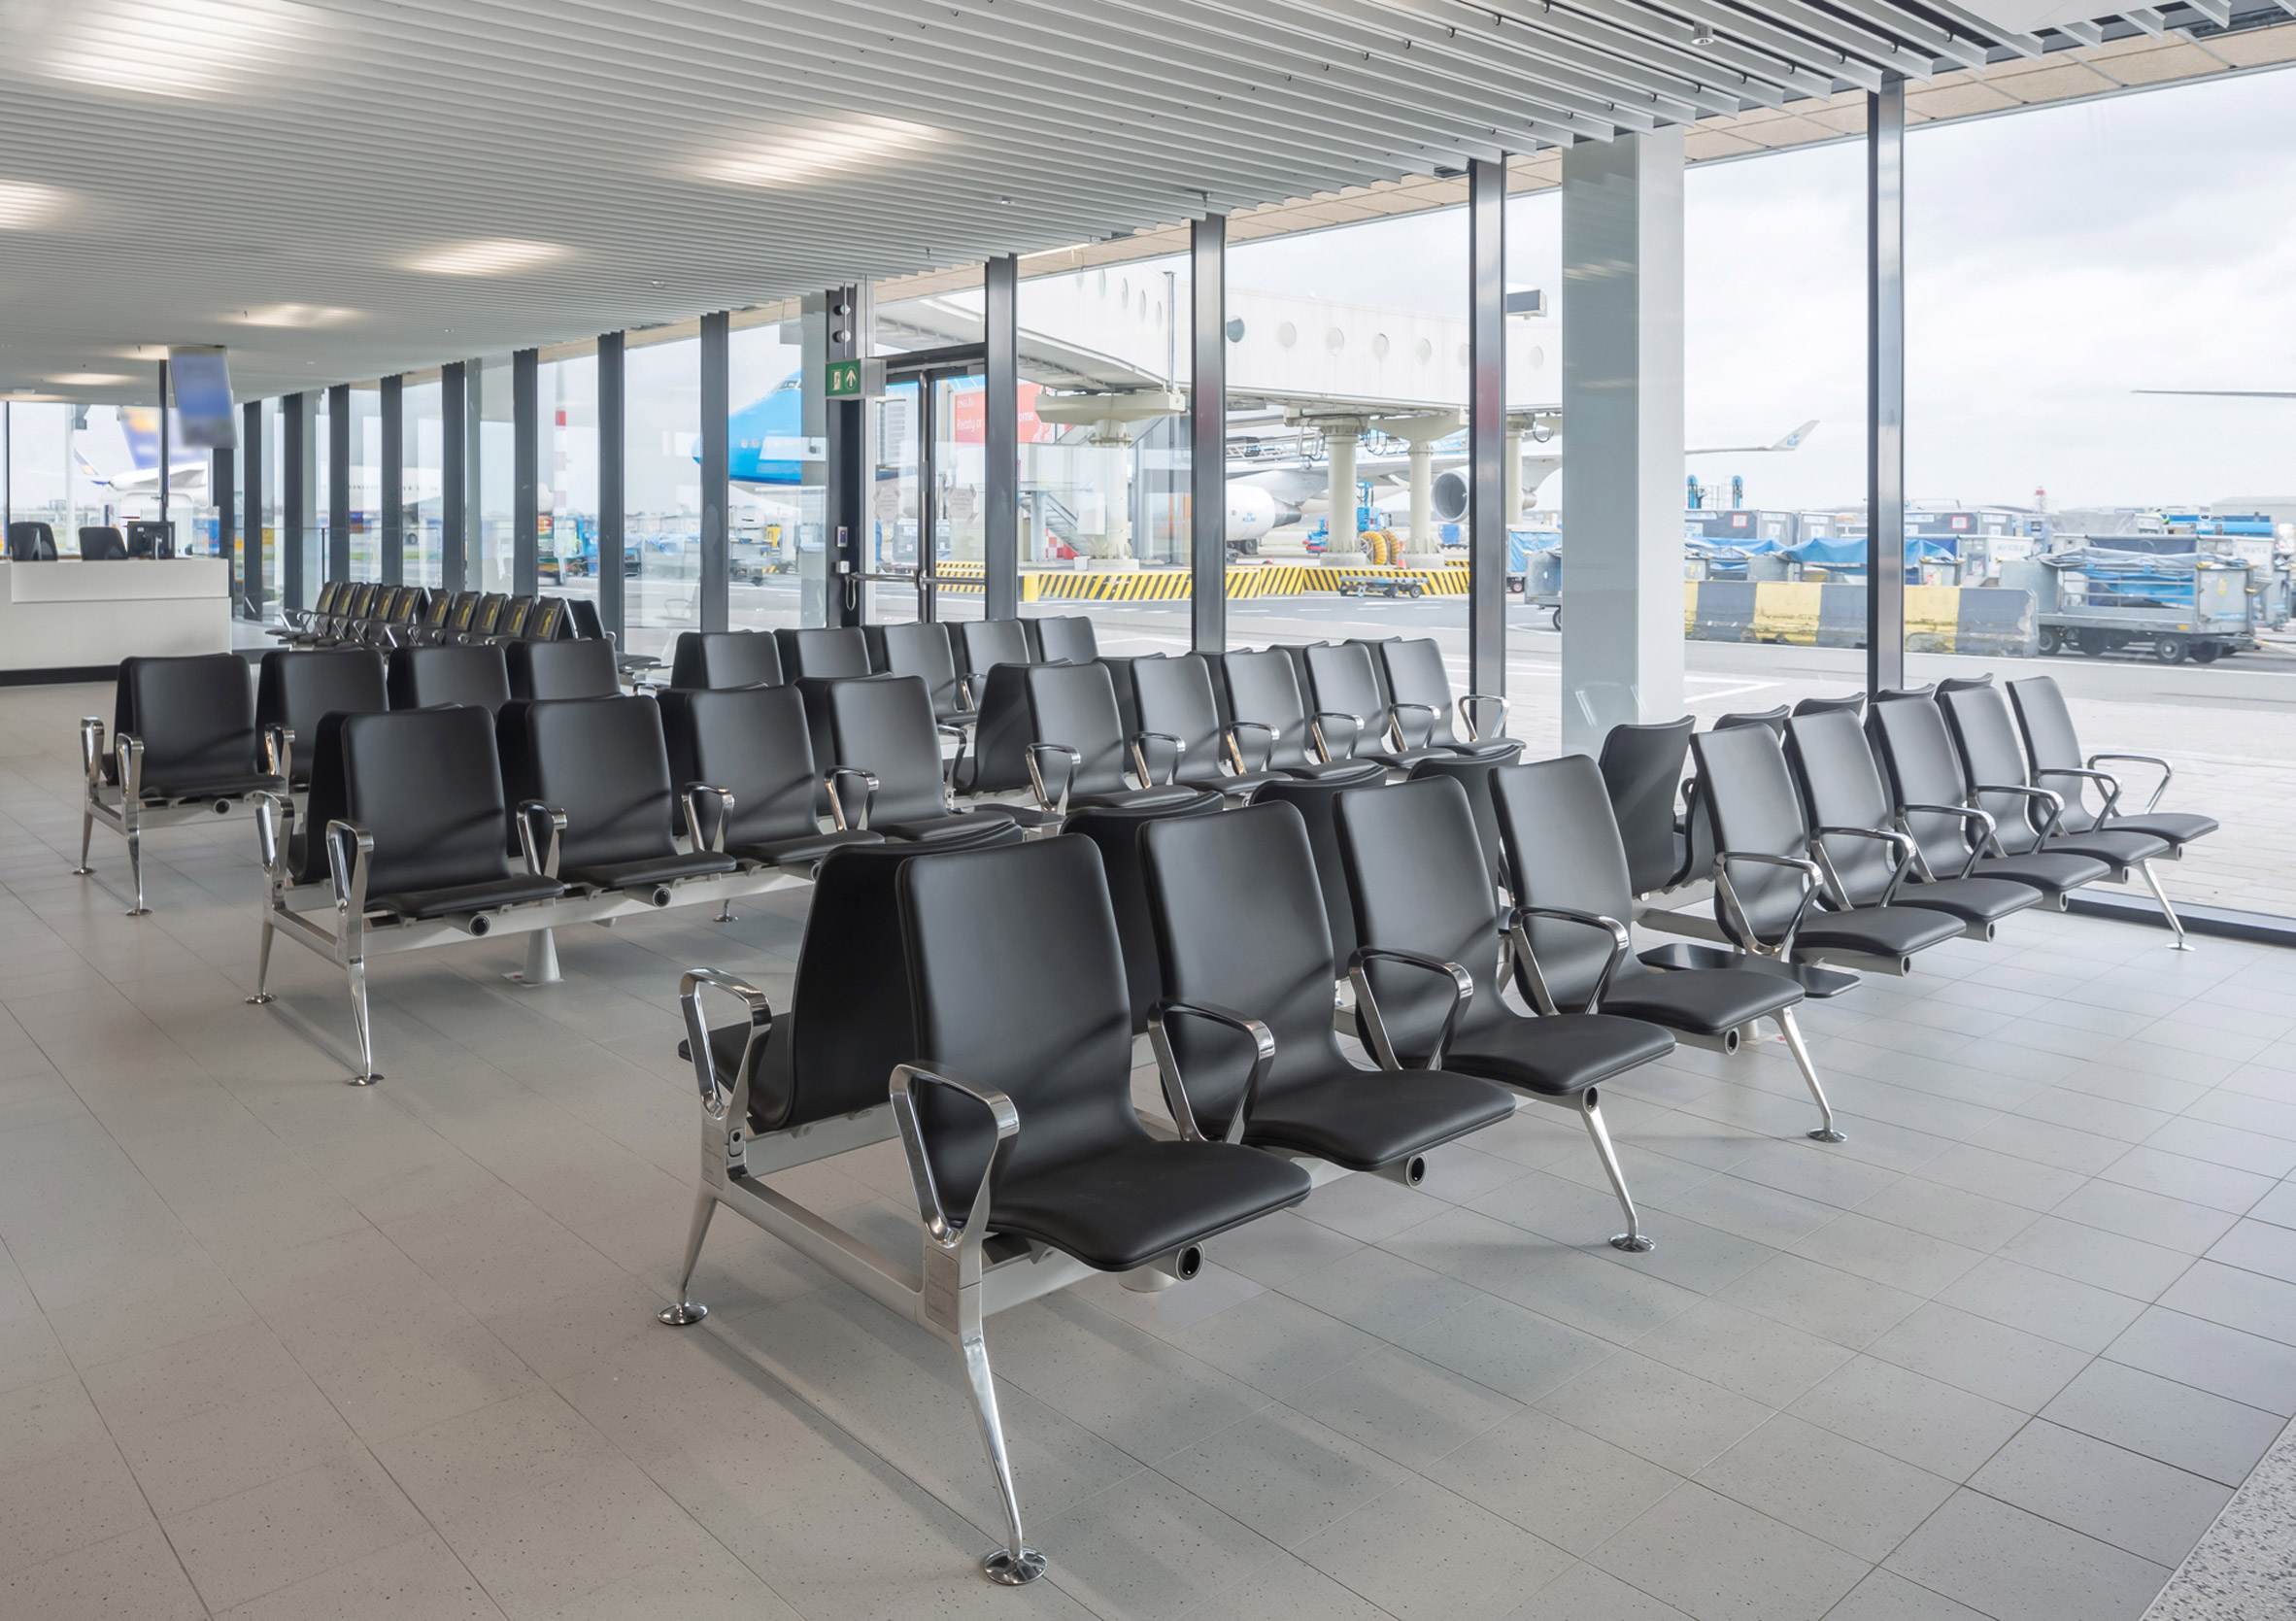 Richard Hutten melts down Schiphol airport's old chairs for new Blink seating system with Lensvelt